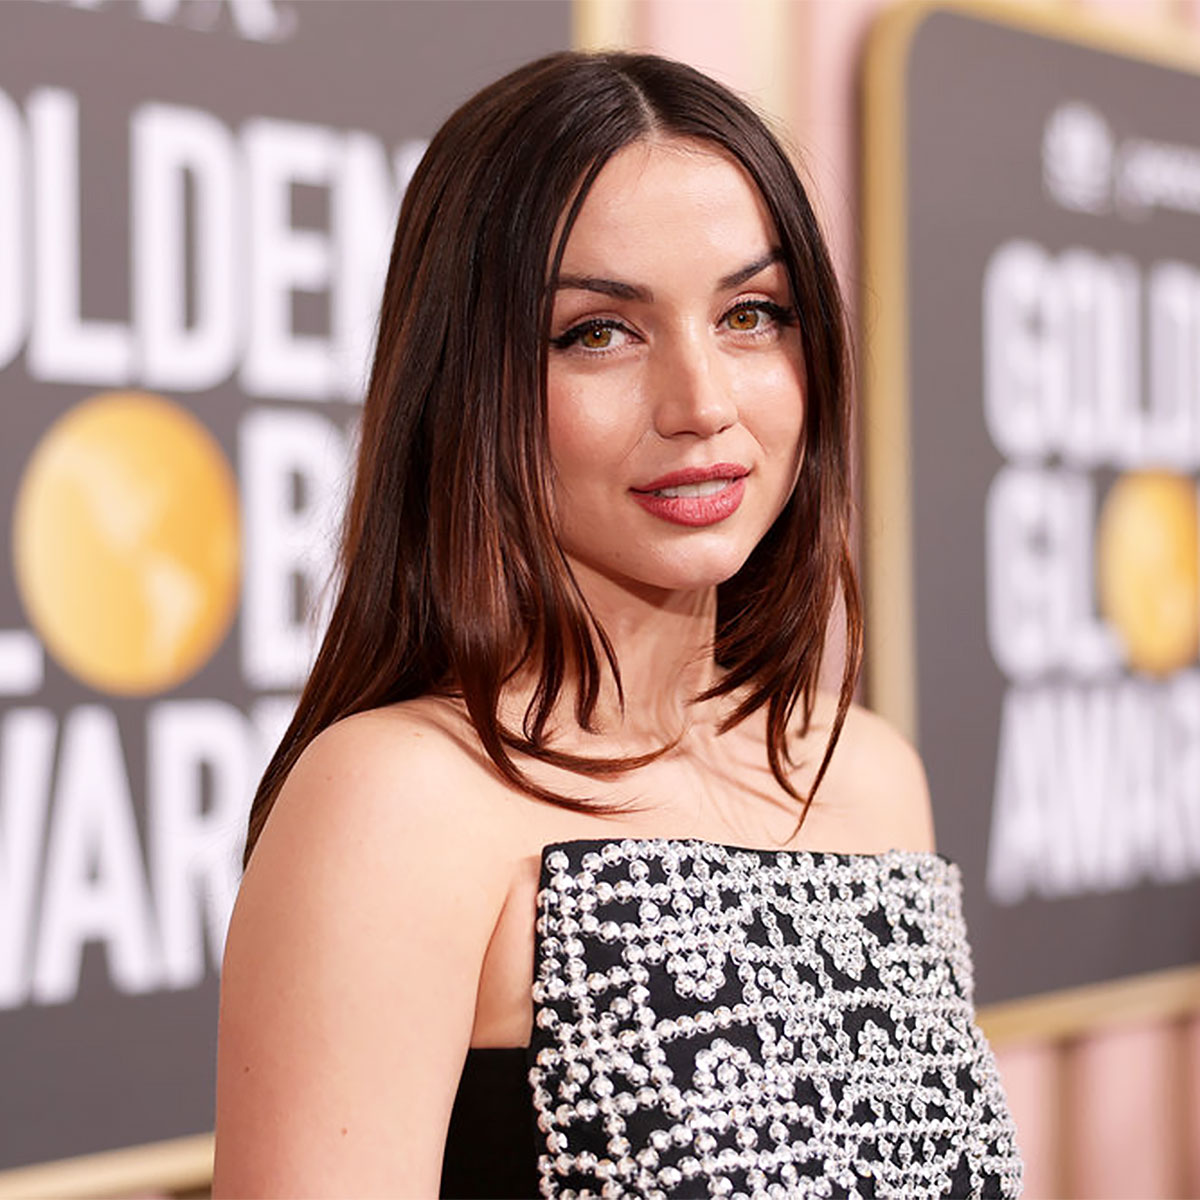 Ana de Armas sparkles in sequins at Hollywood 'Blonde' premiere